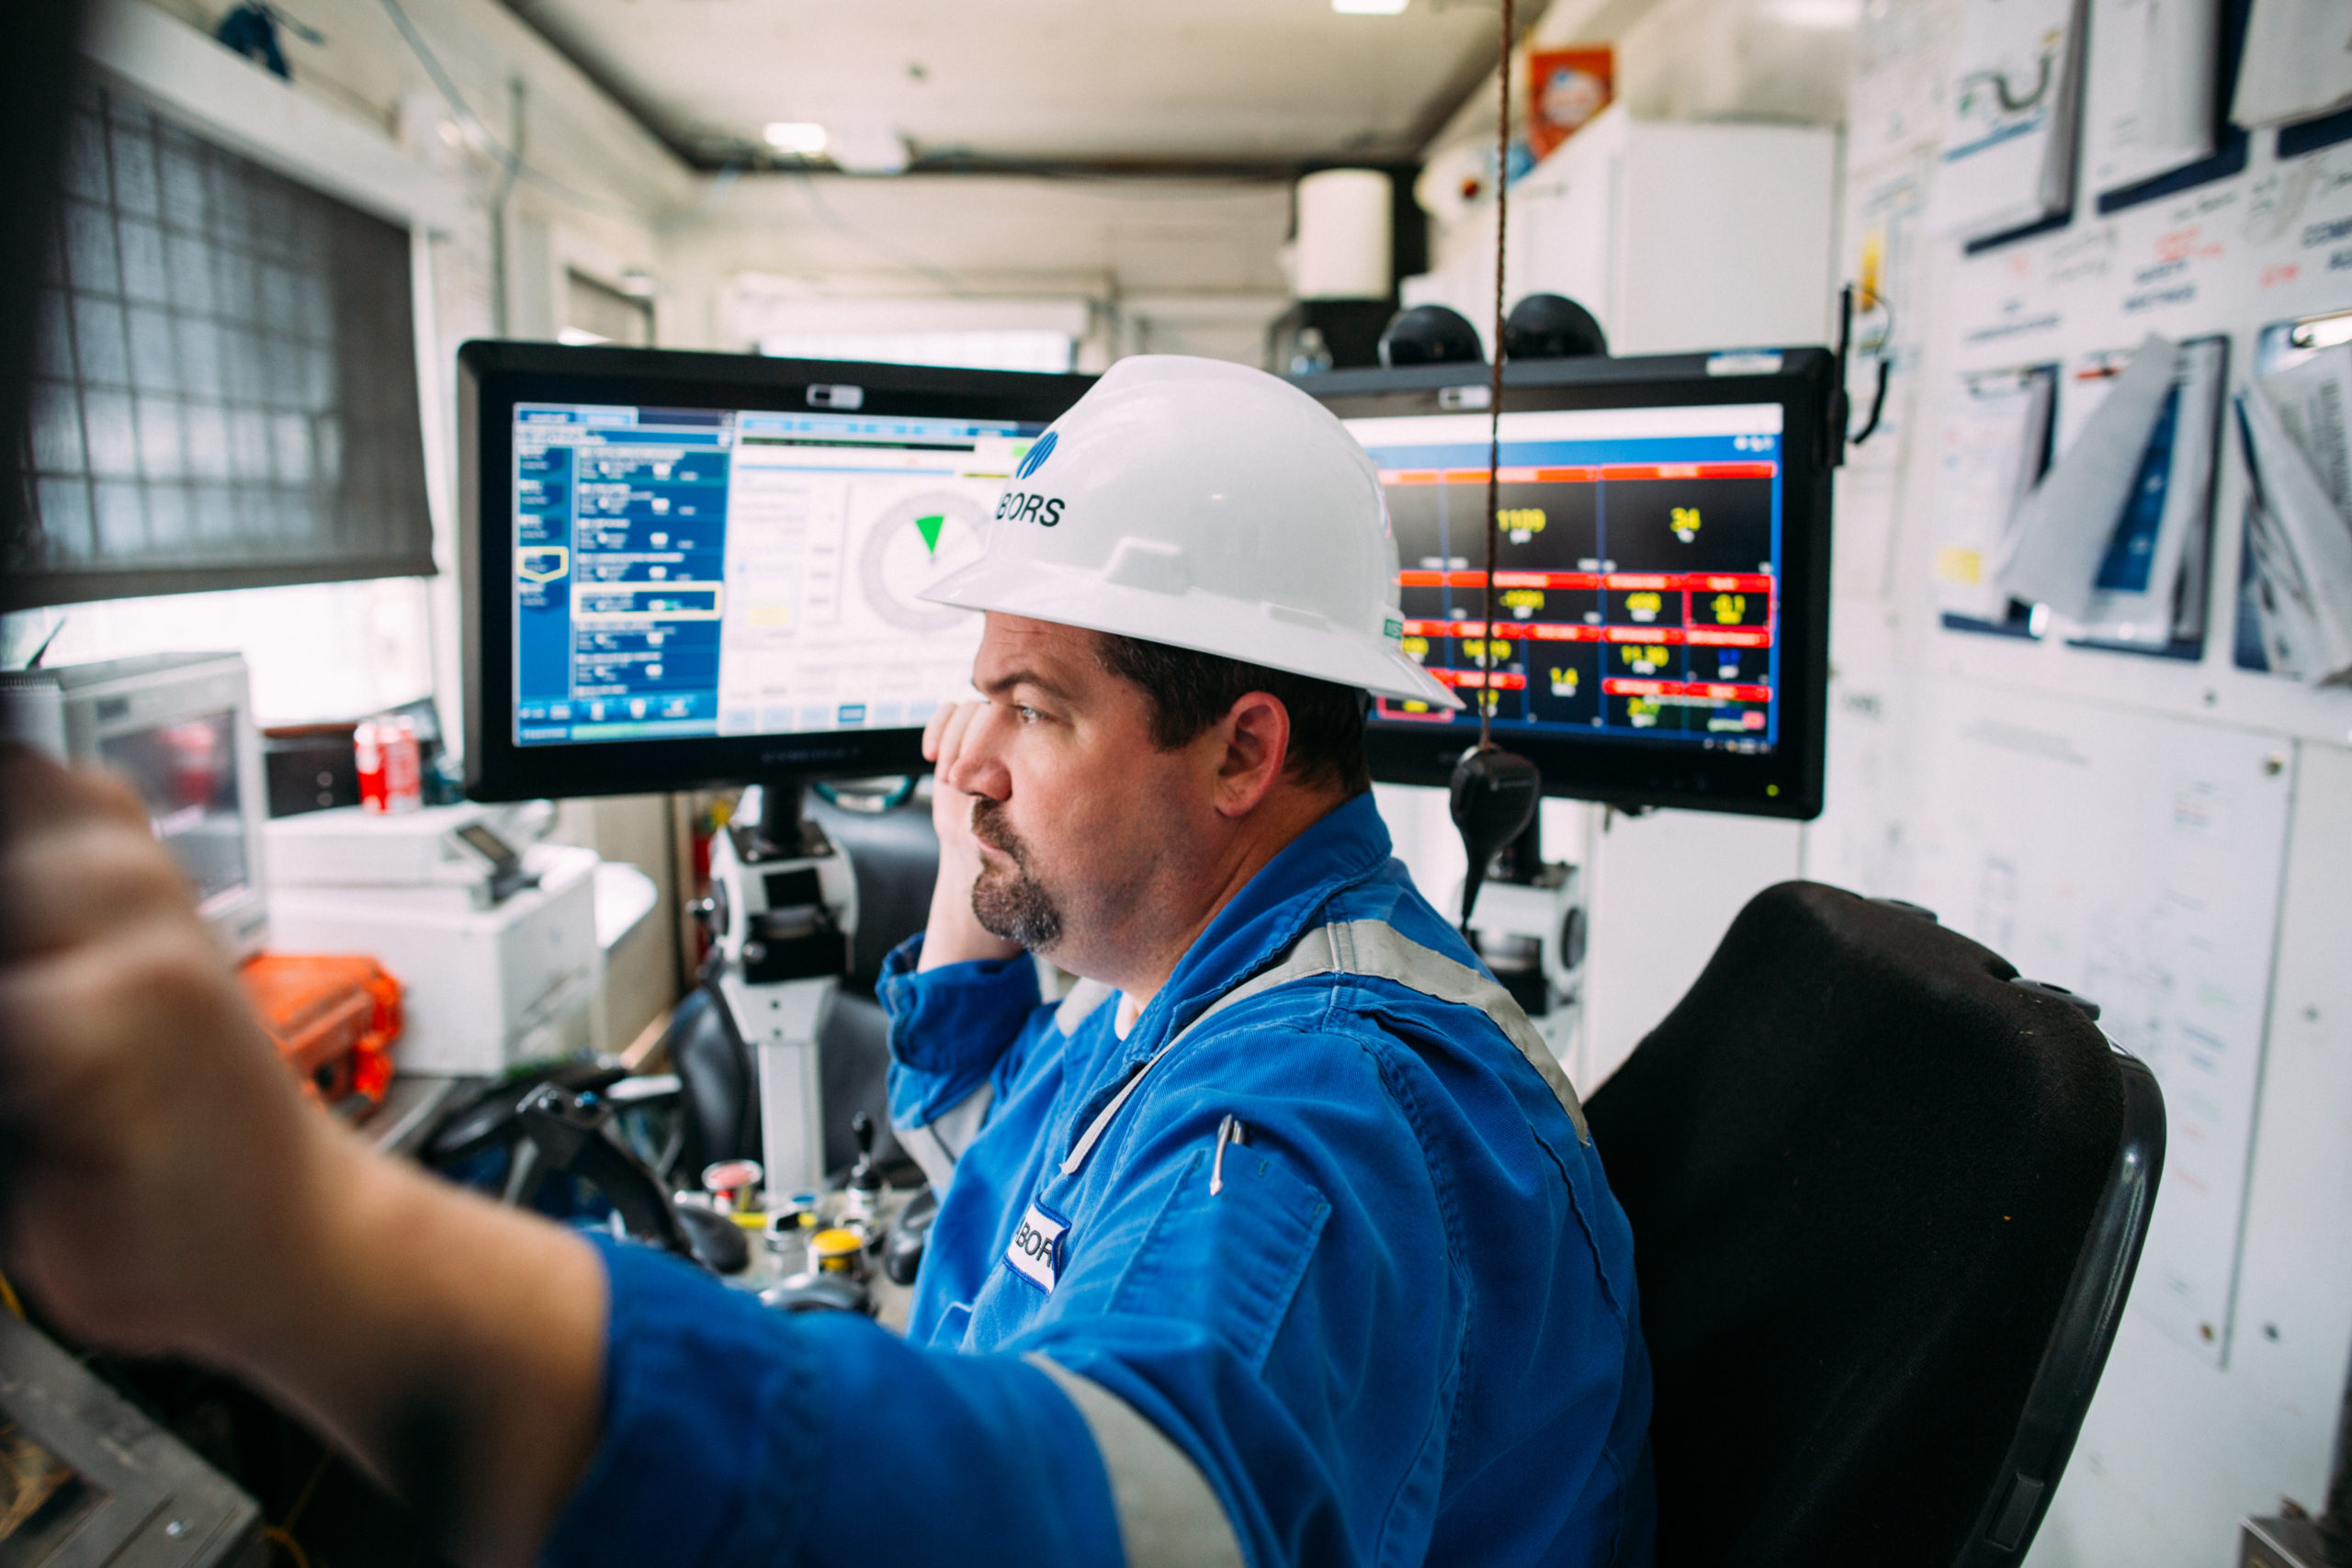 A driller leveraging the SmartROS™ rig operating system